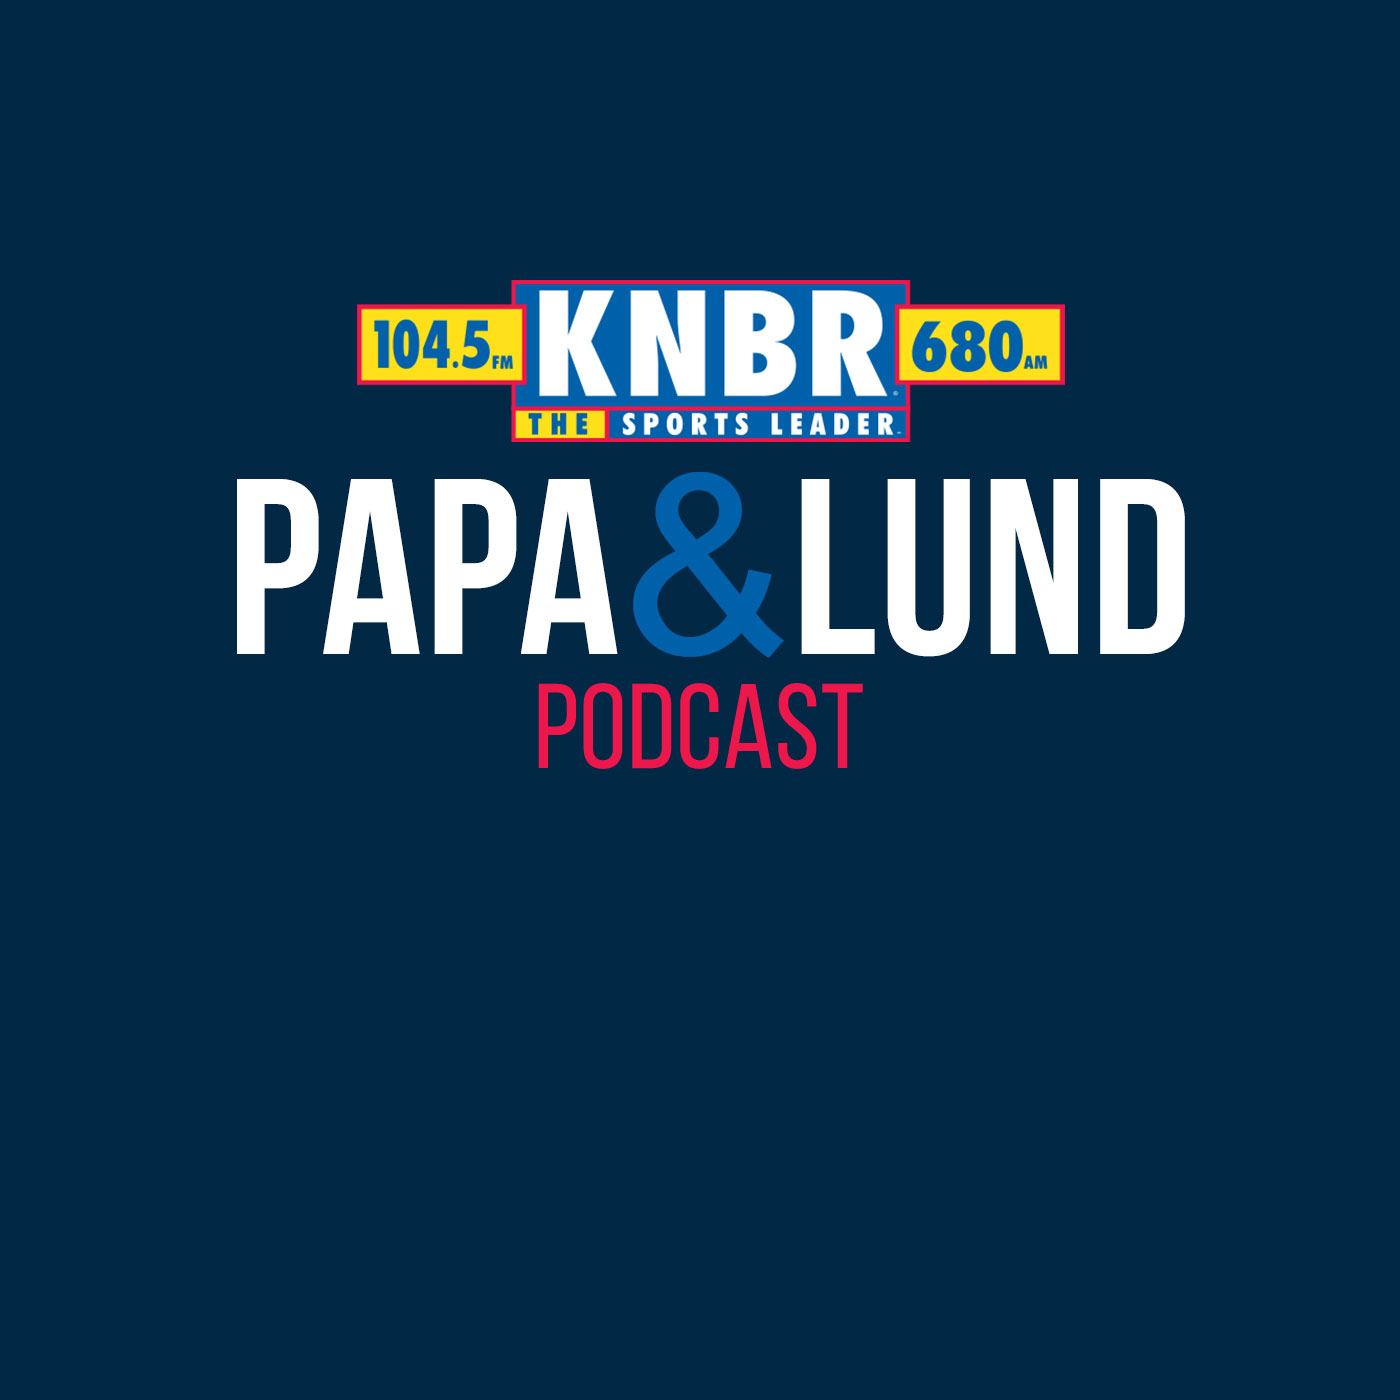 4-26 Mike Silver joins Papa & Lund to discuss Deebo Samuel's trade value and why it would make sense for the 49ers to trade one of their star Wide Receivers